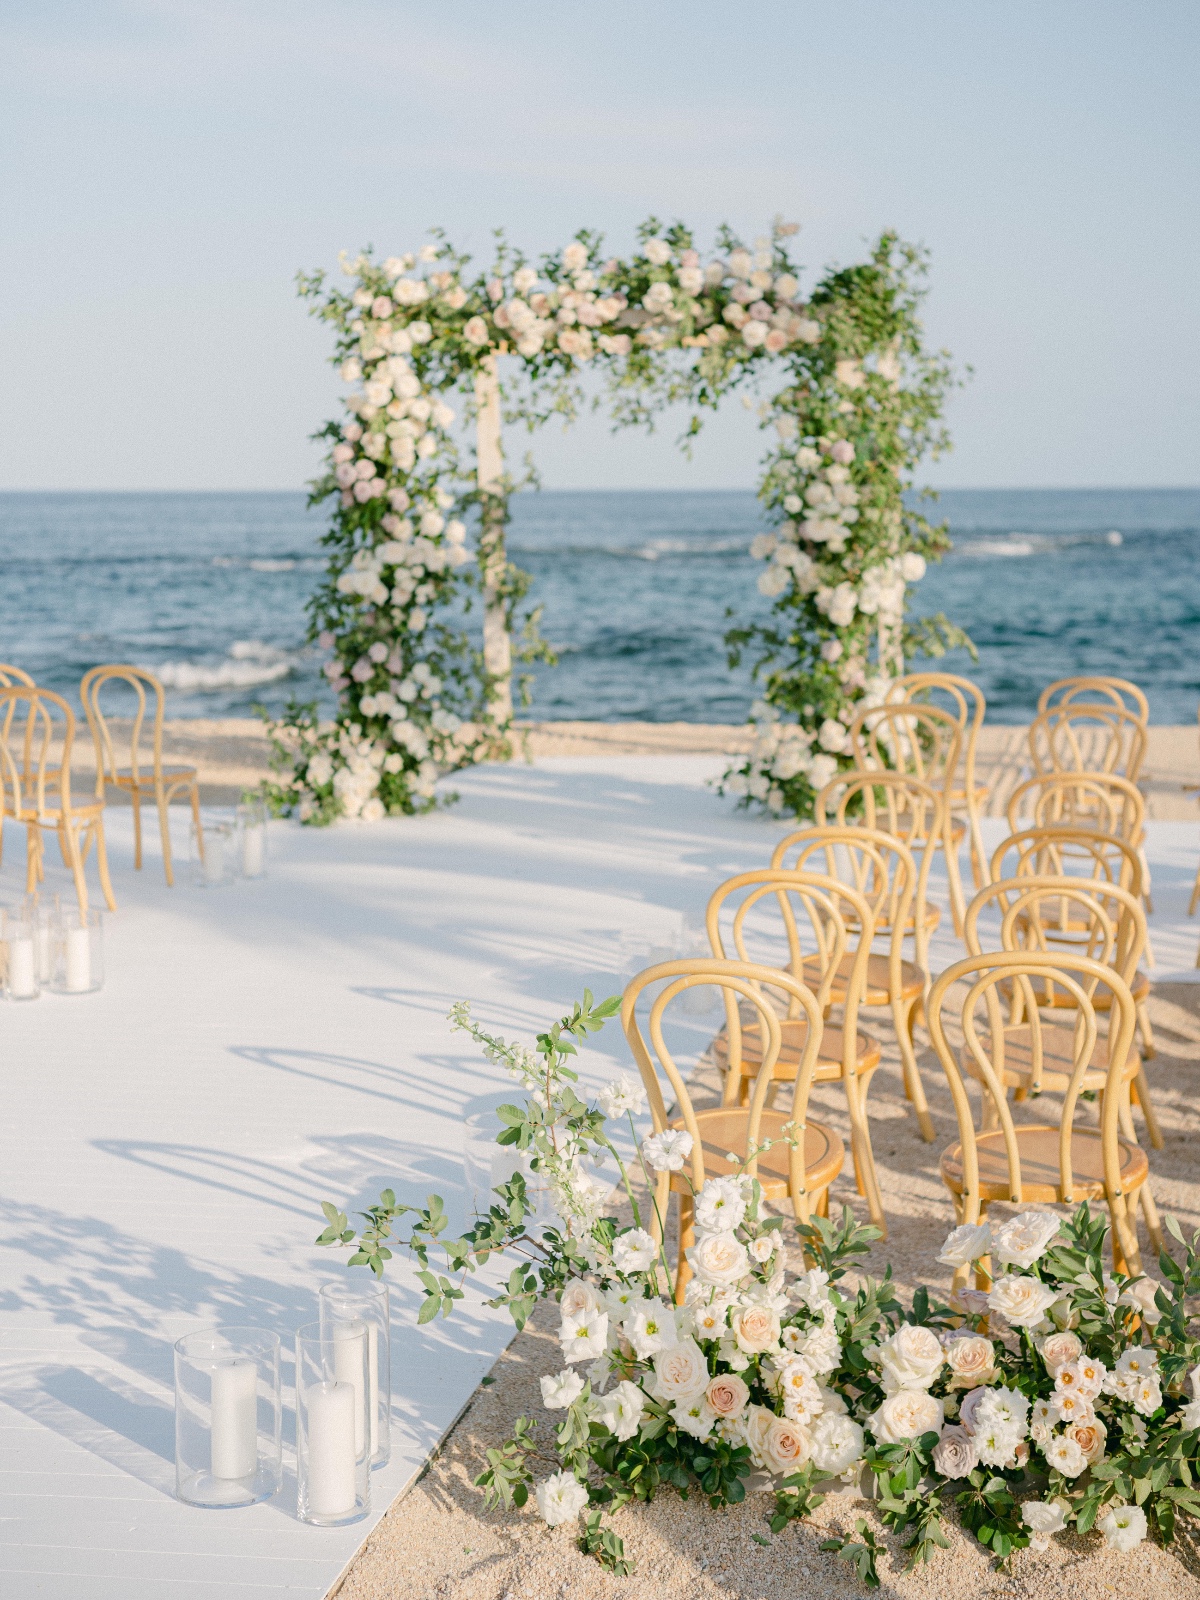 Ceremony area with floral arch, rattan chairs, and white roses floral arrangements next to aisle entrance